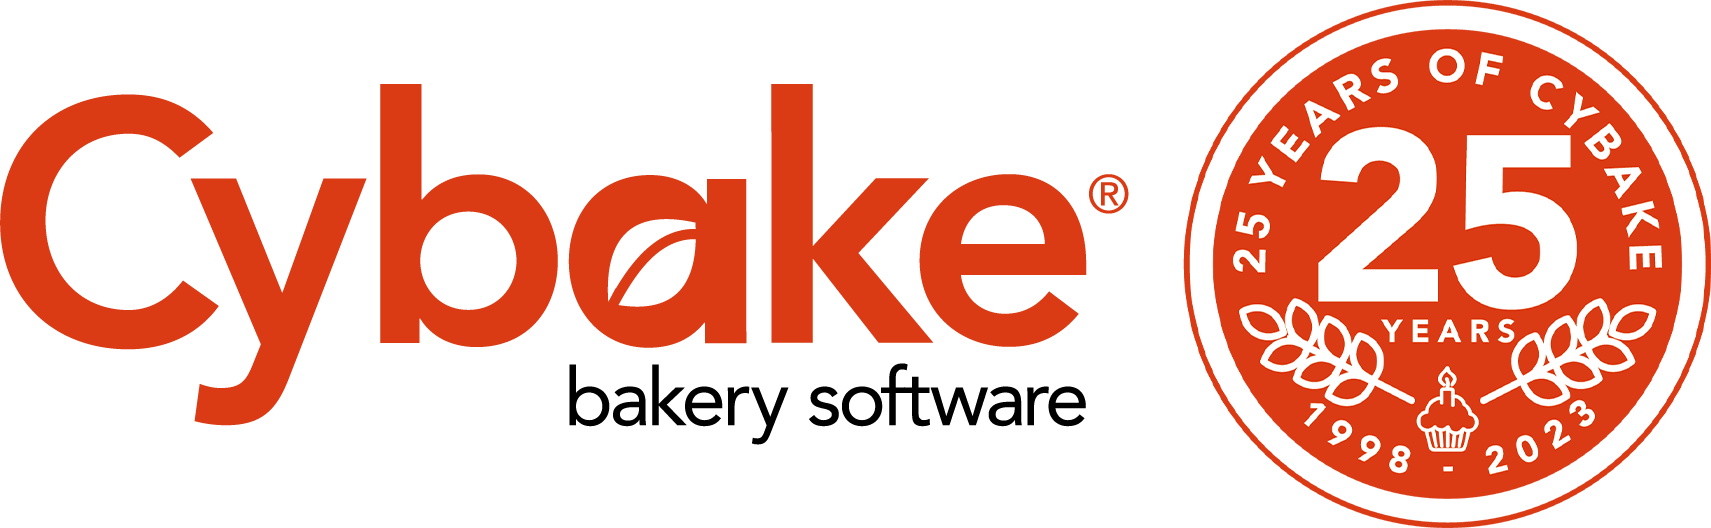 How Cybake helps bakeries meet today's global challenges - Cybake